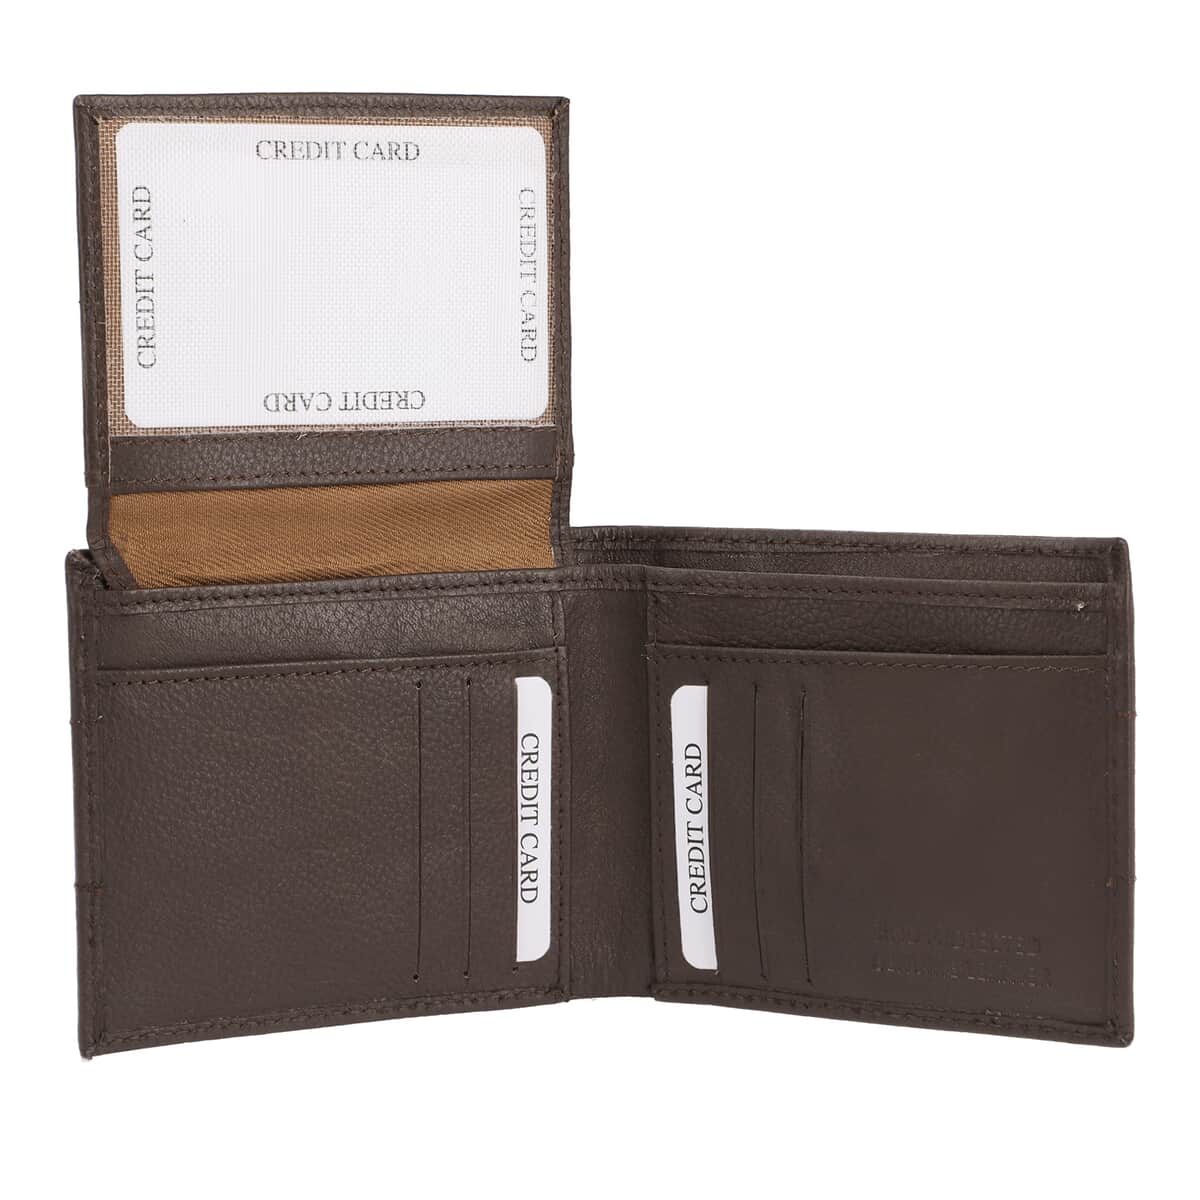 "UNION CODE Genuine Leather Bi Fold Men's Wallet (RFID Protected) SIZE: 4.25(L)x3.25(H) inches COLOR: Black" image number 4